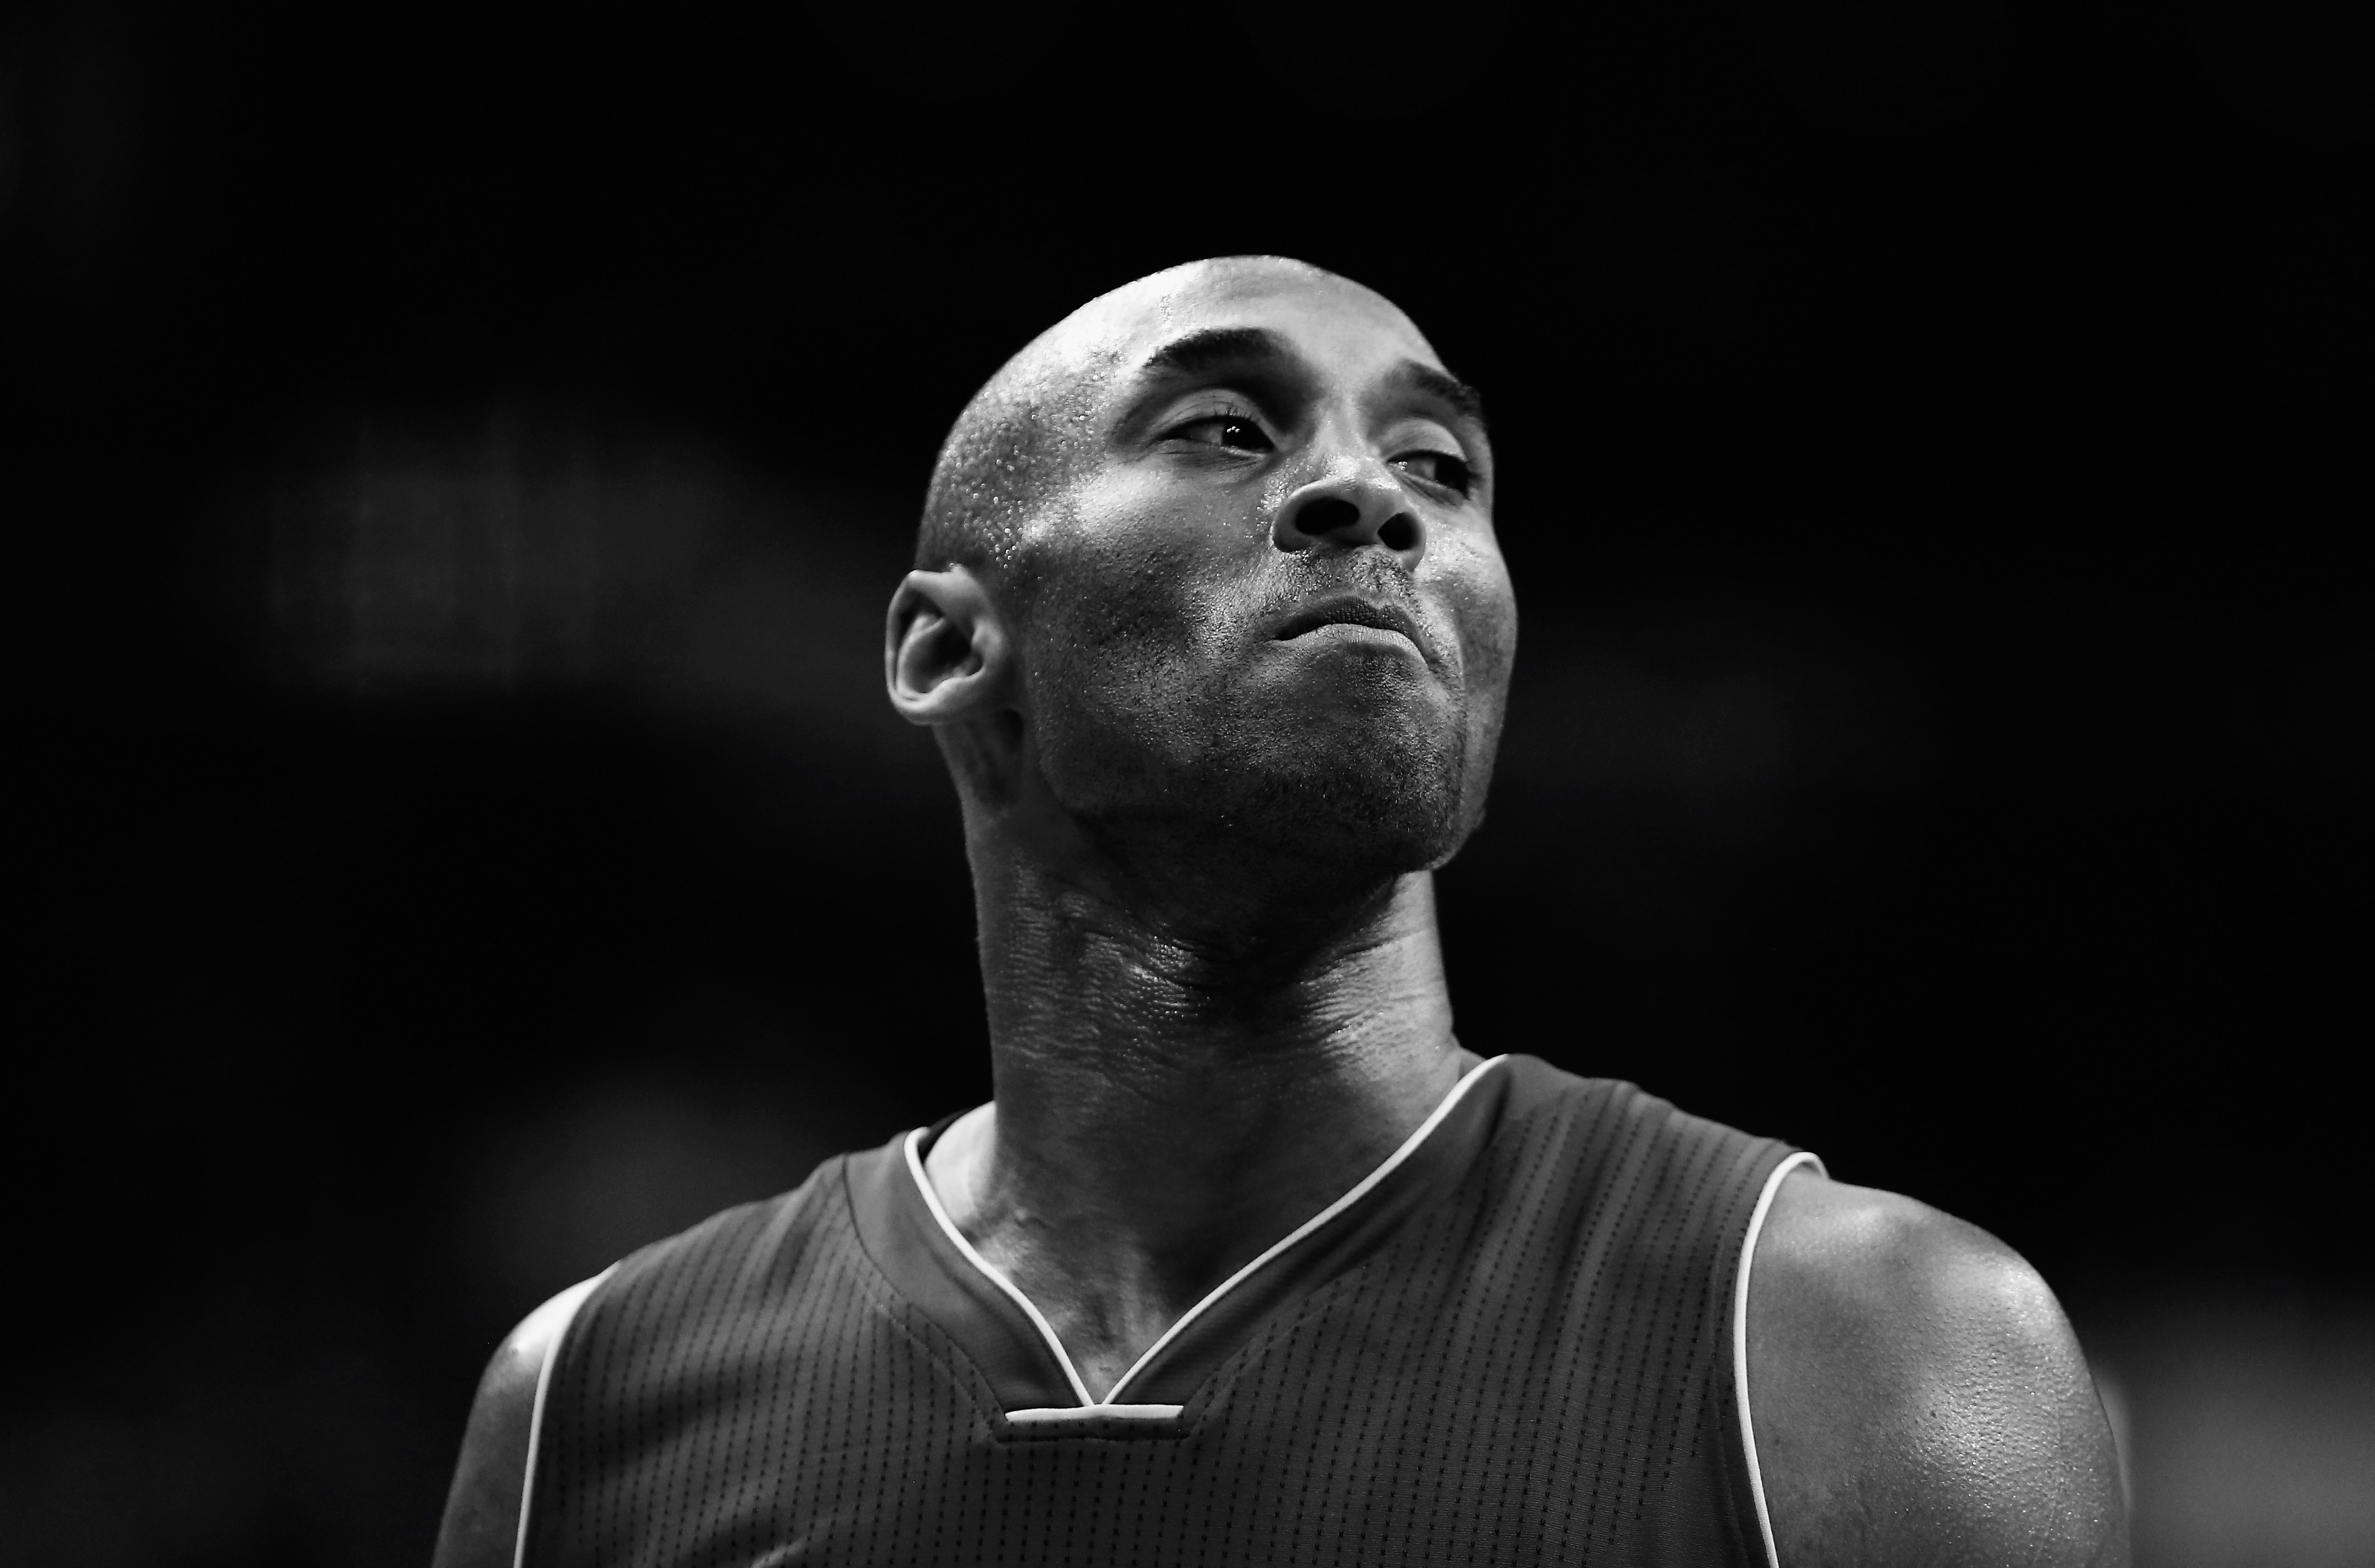 Rappler - As the world continues to honor the memories of Kobe and